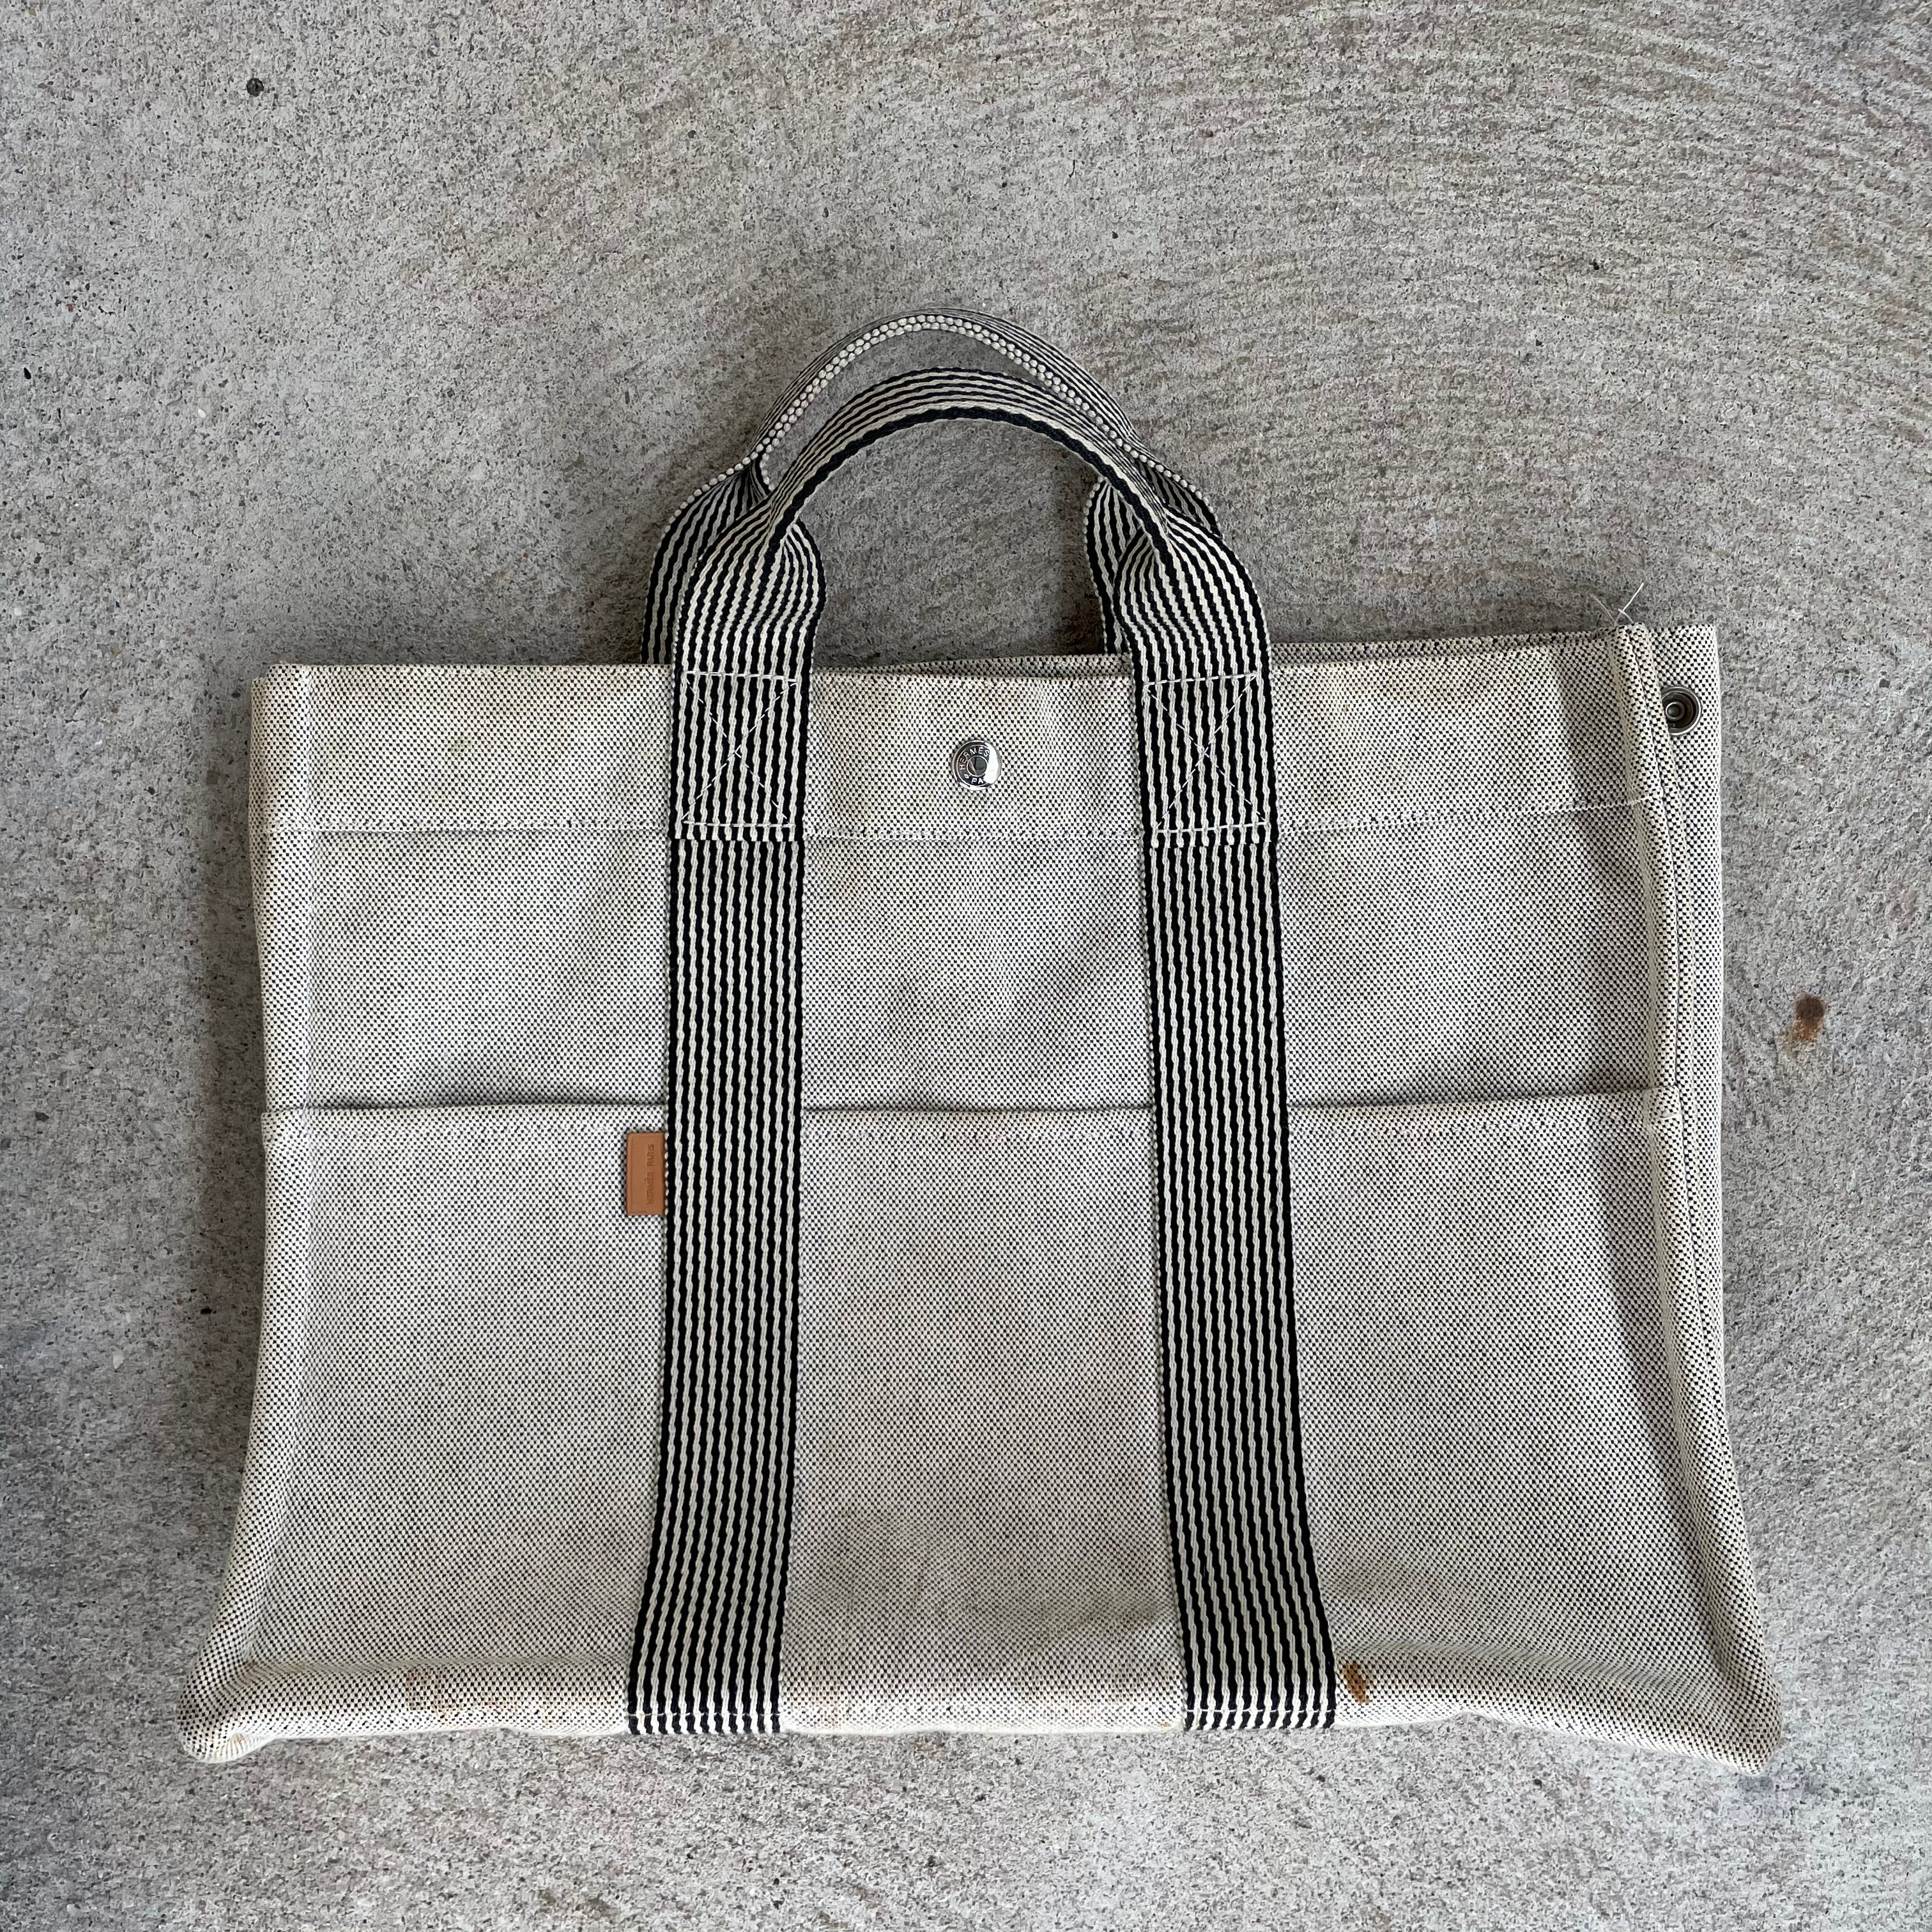 HERMES Authentic Herline Bag Gray Canvas Tout Tote Bag 